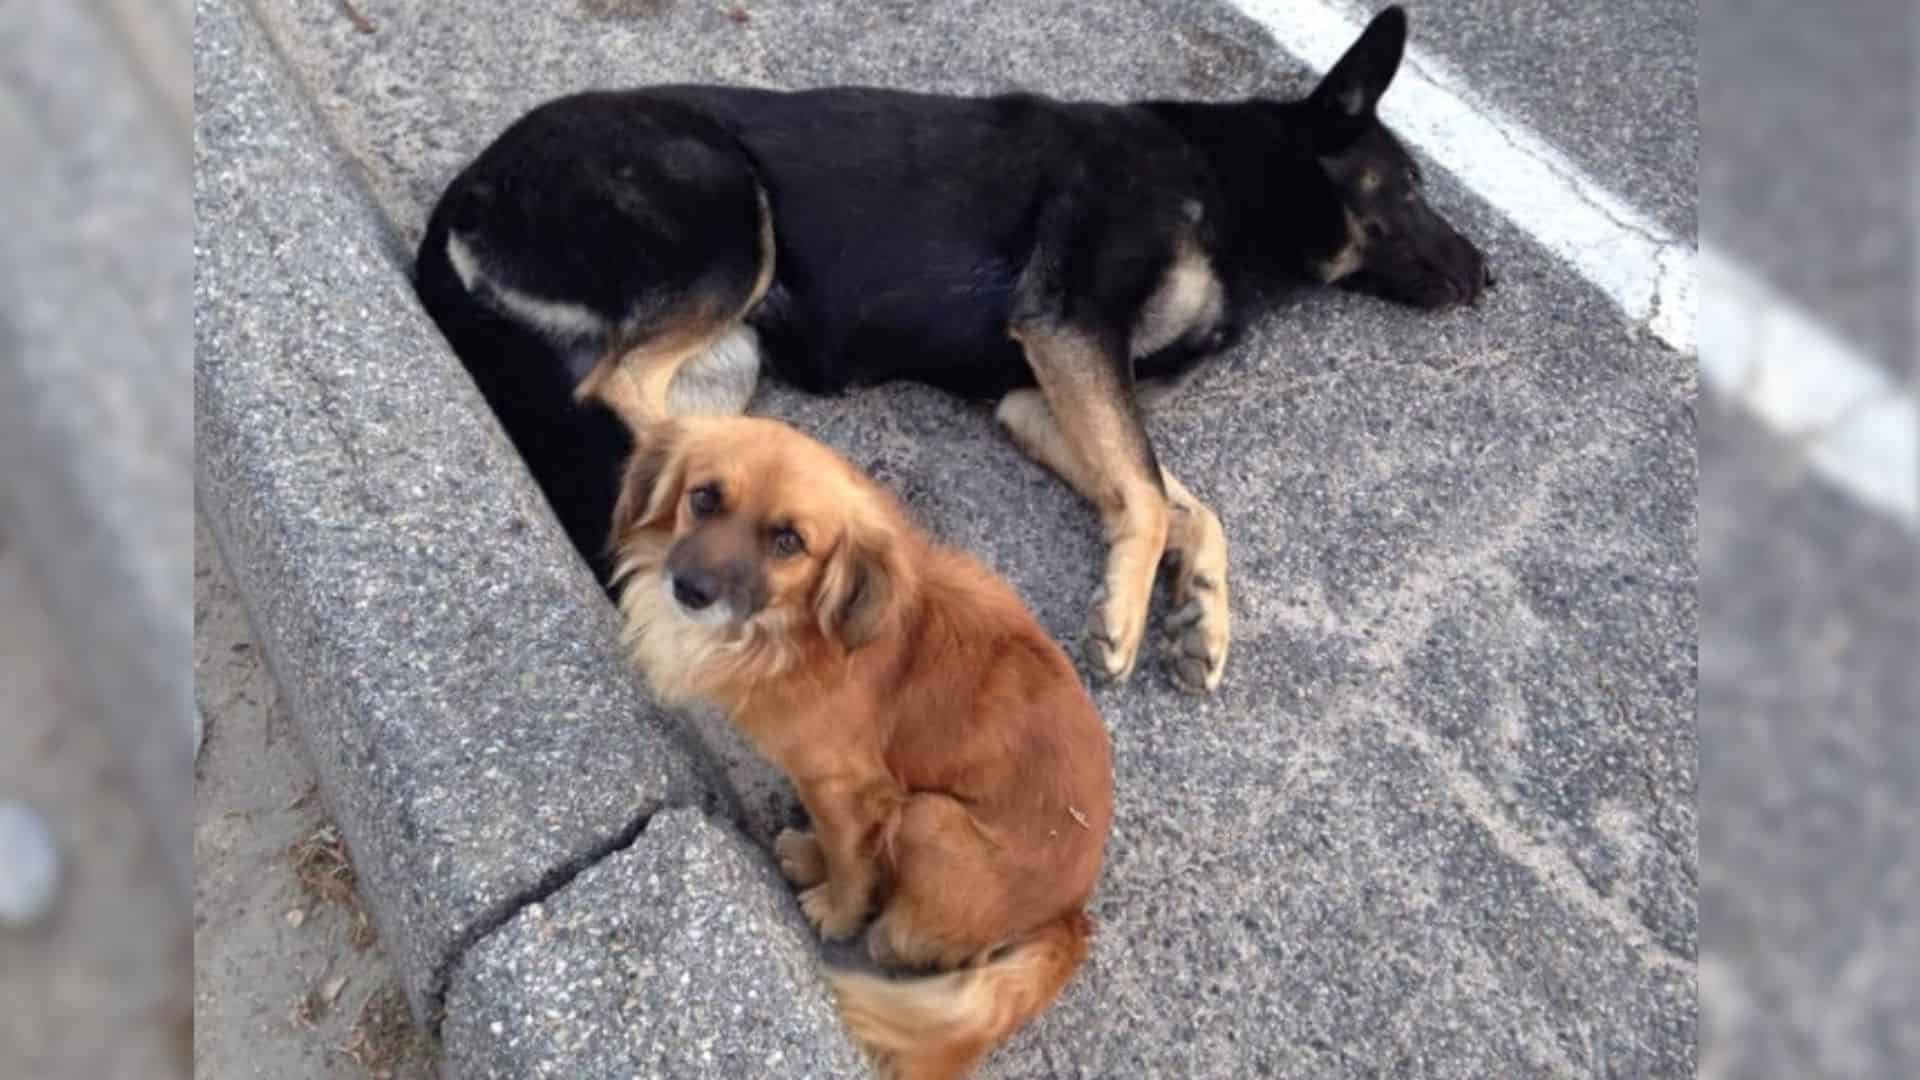 Stray Dog Refuses To Leave His Pregnant German Shepherd Friend Until She’s Safe